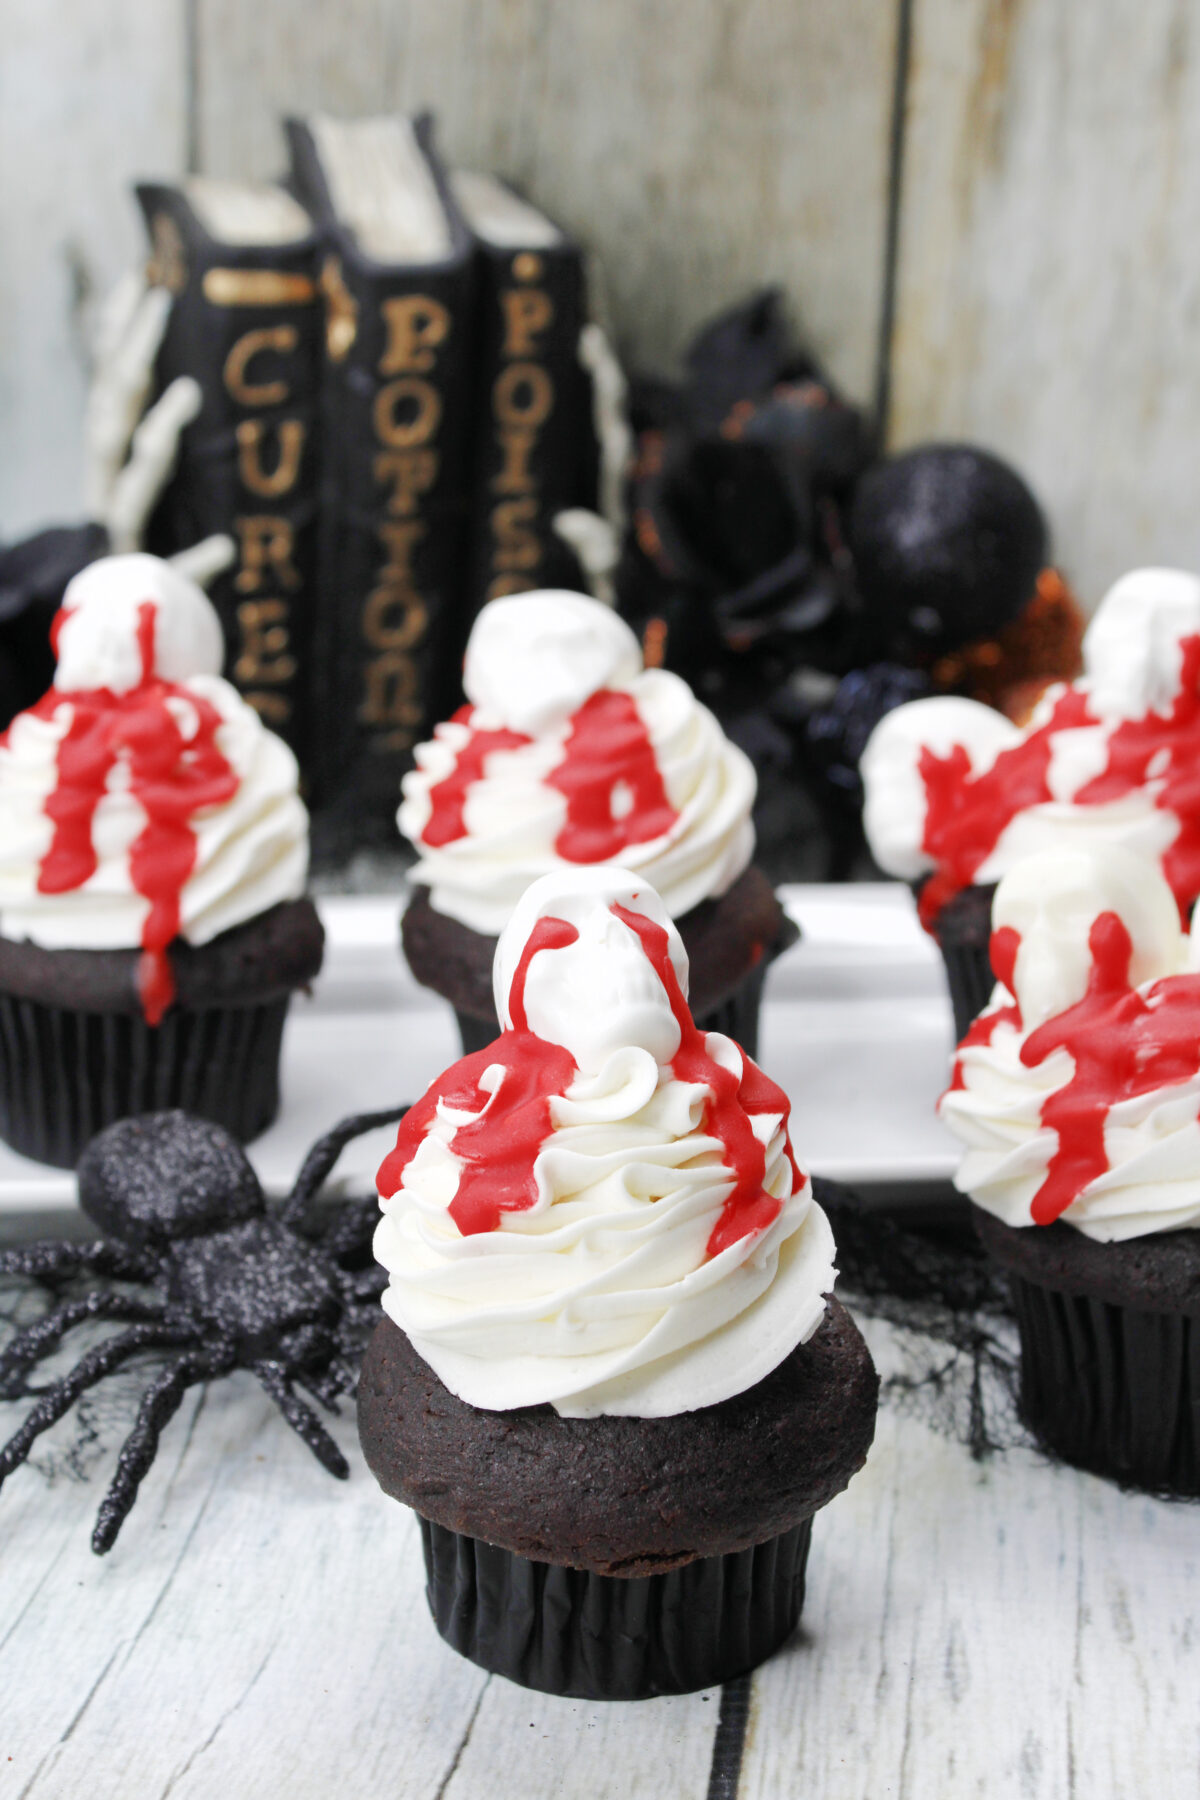 Get into the spirit of Halloween with this spooky treat! Learn to make Bloody Skull Cupcakes using simple ingredients with this easy recipe!